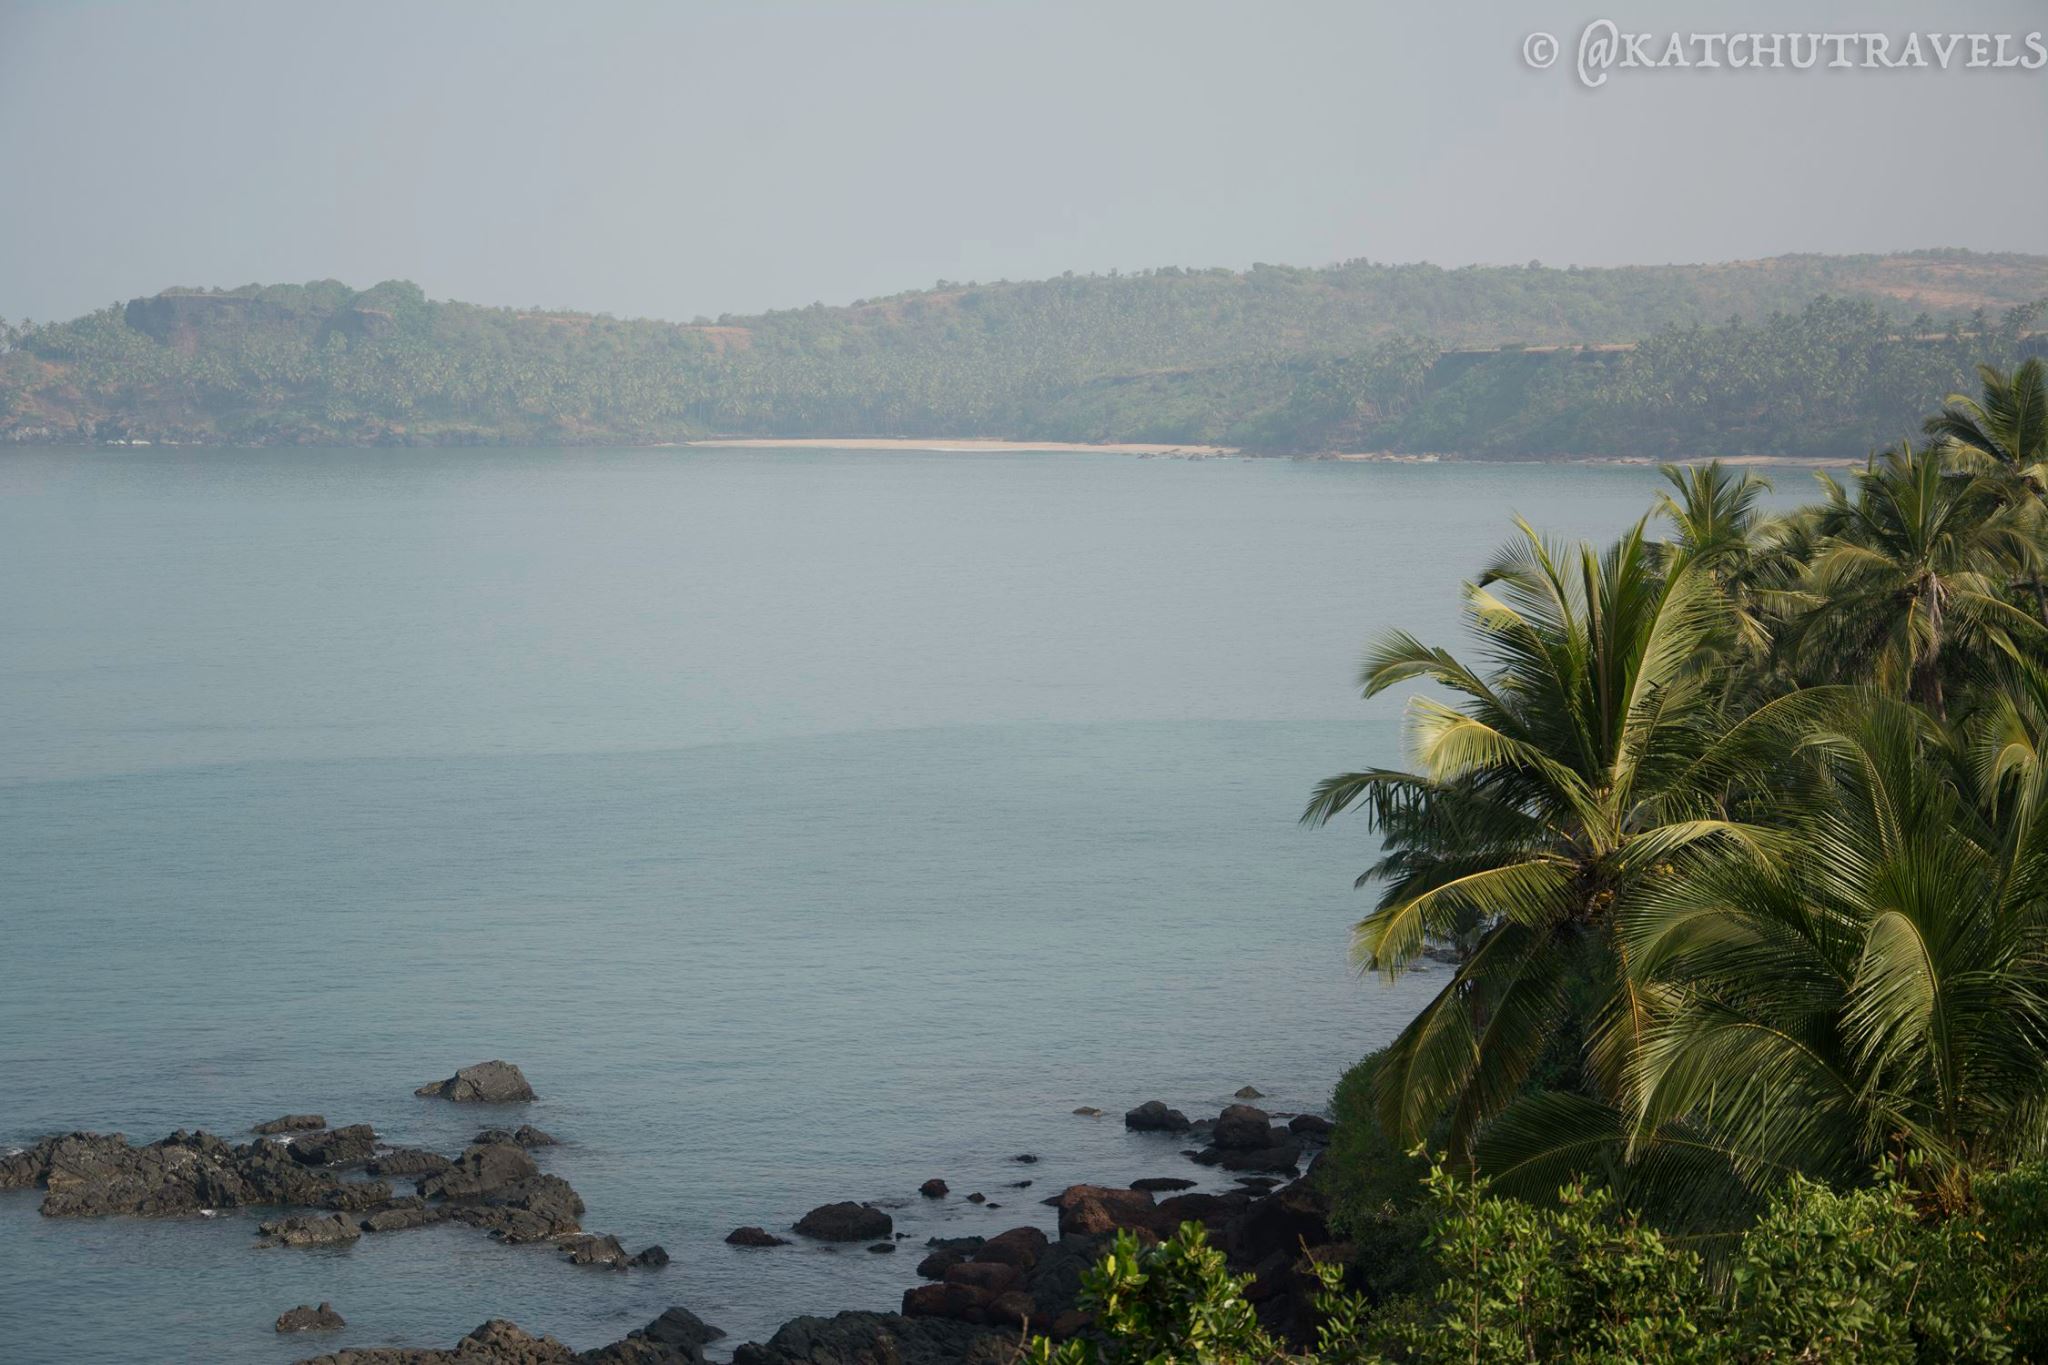 Cabo De Rama Beach is in South Goa, 45 minutes away from Palolem and 30 minutes away from Agonda